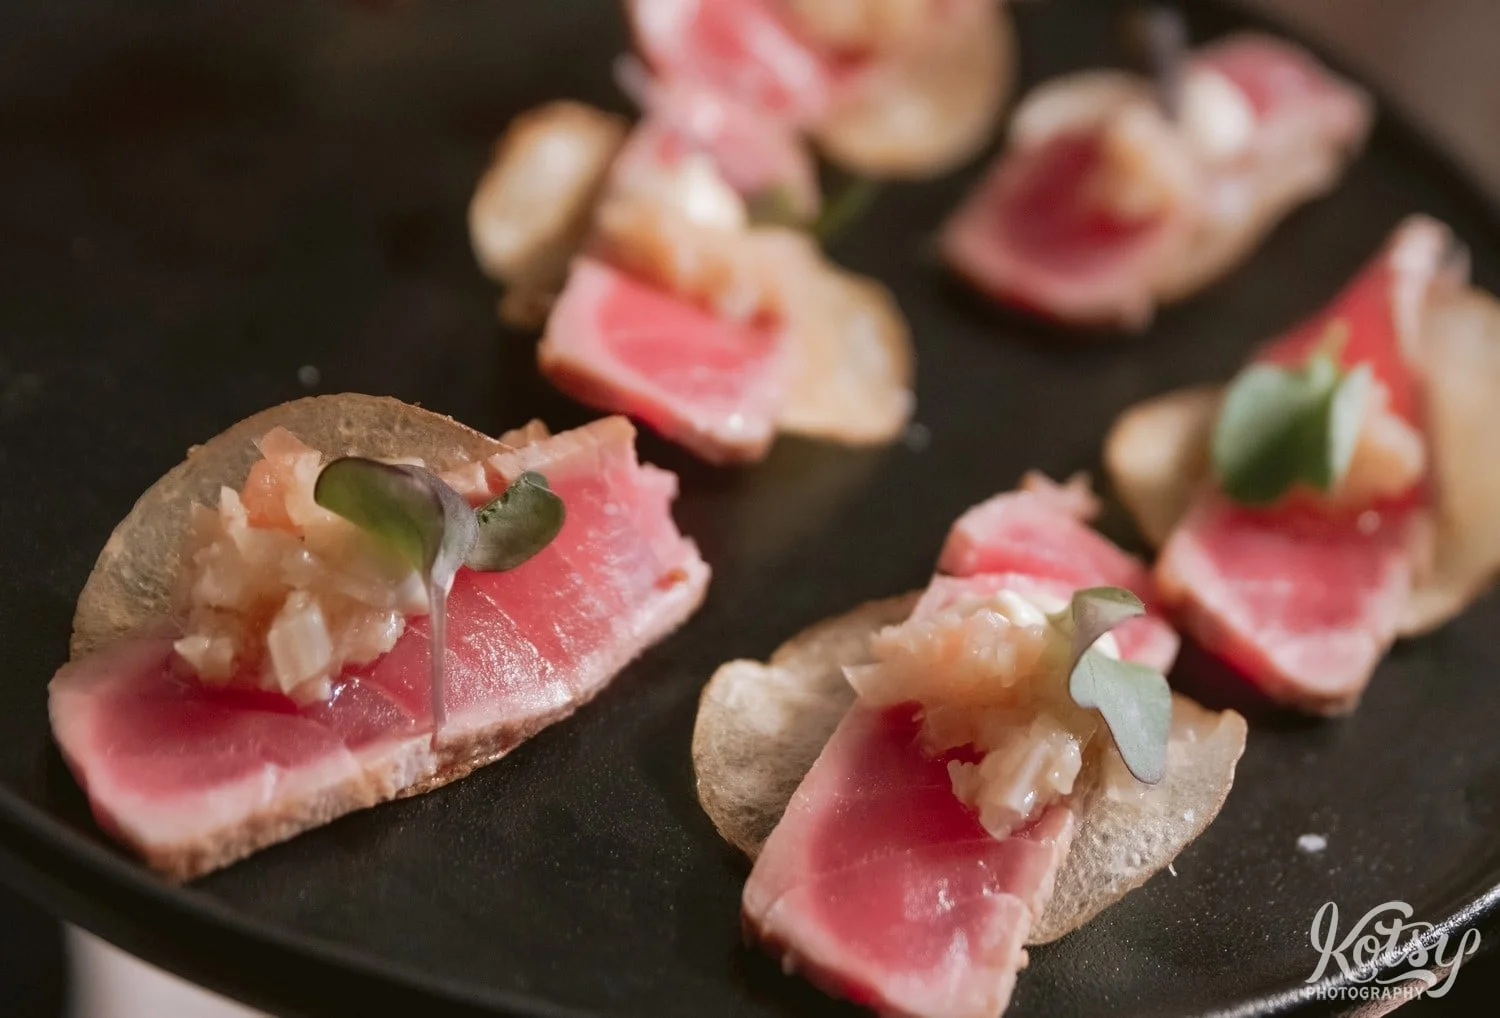 Ahi Tuna bites are seen on a serving tray